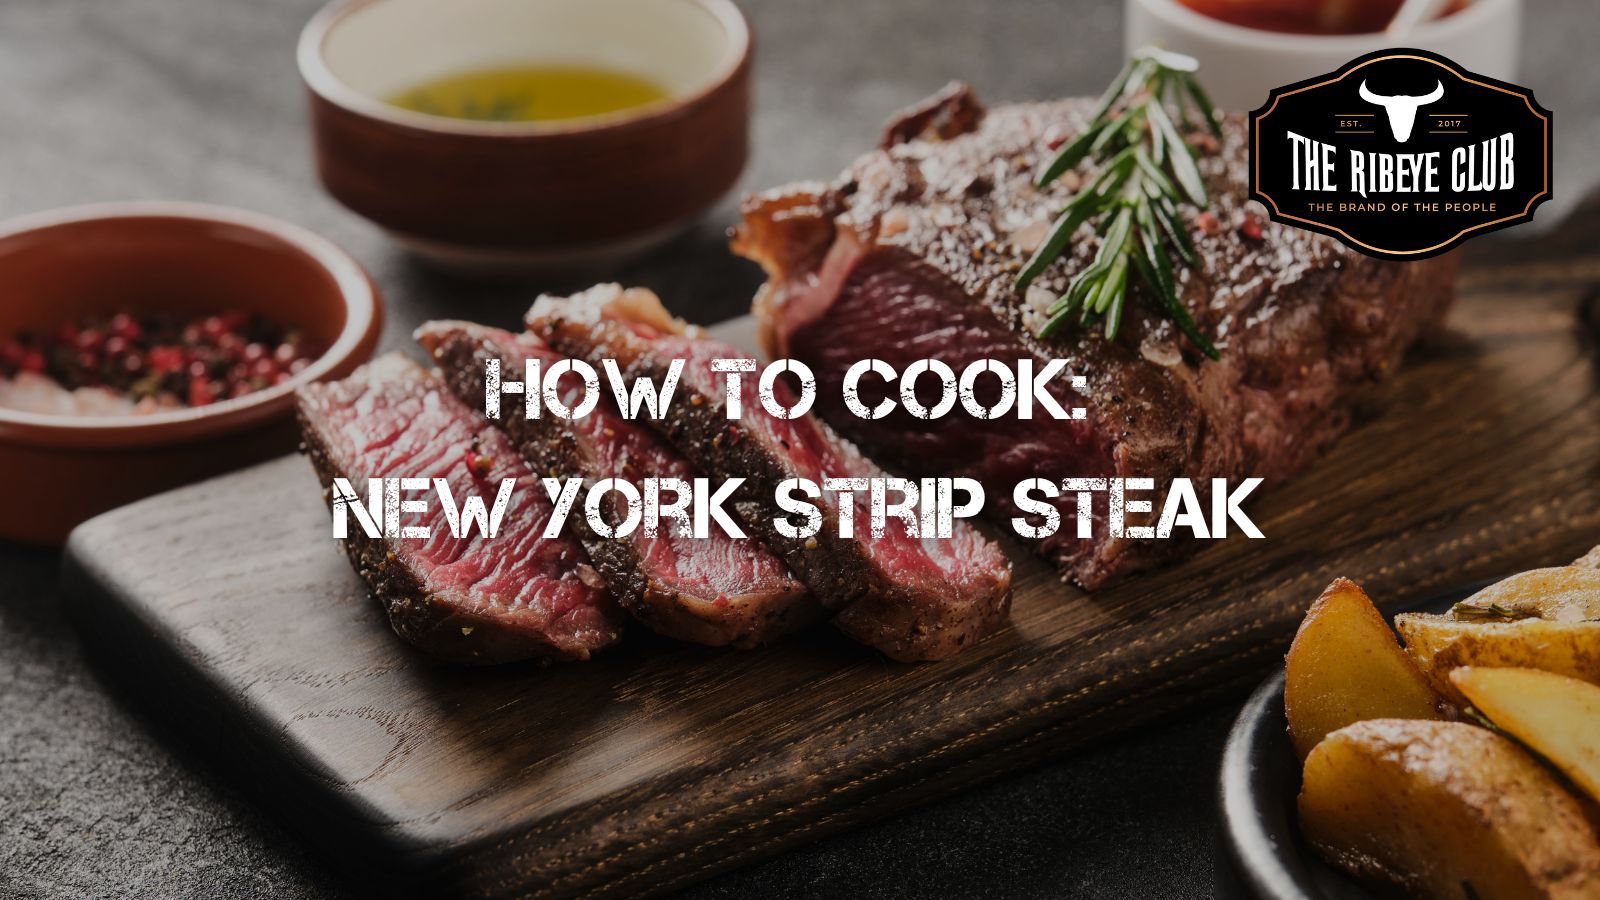 How to cook: New York Strip Steak